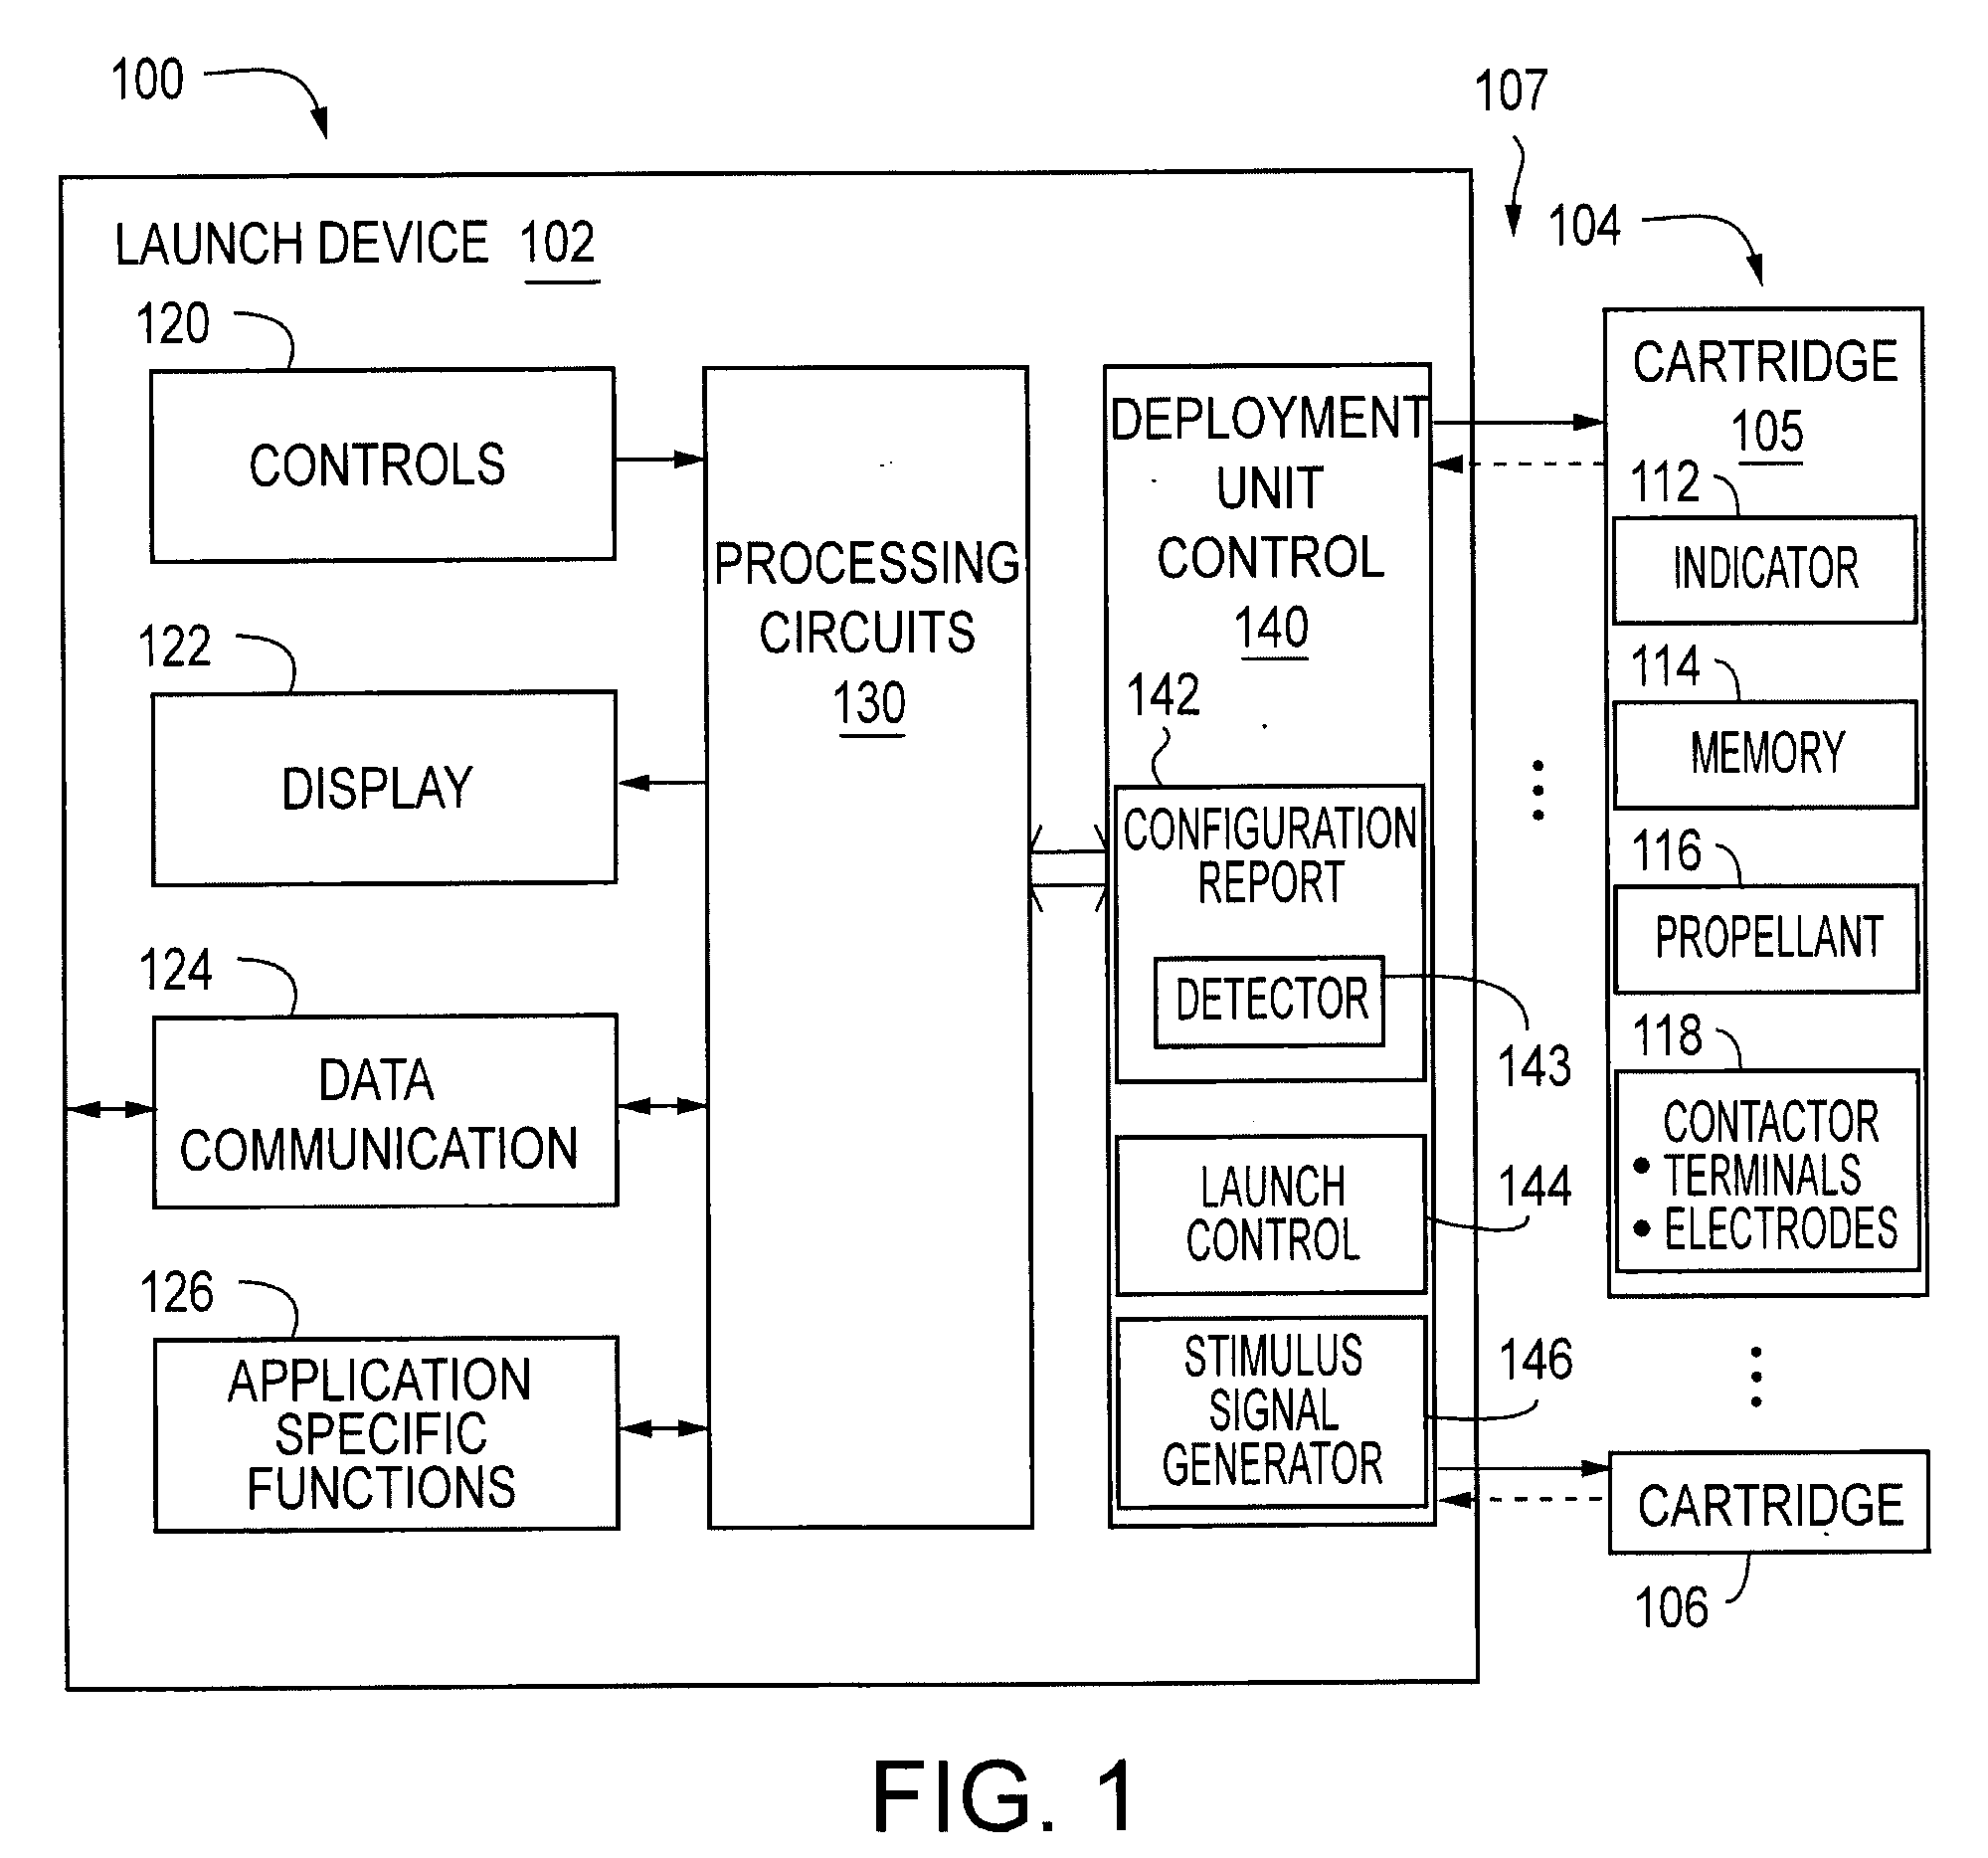 Systems and Methods for Modular Electronic Weaponry